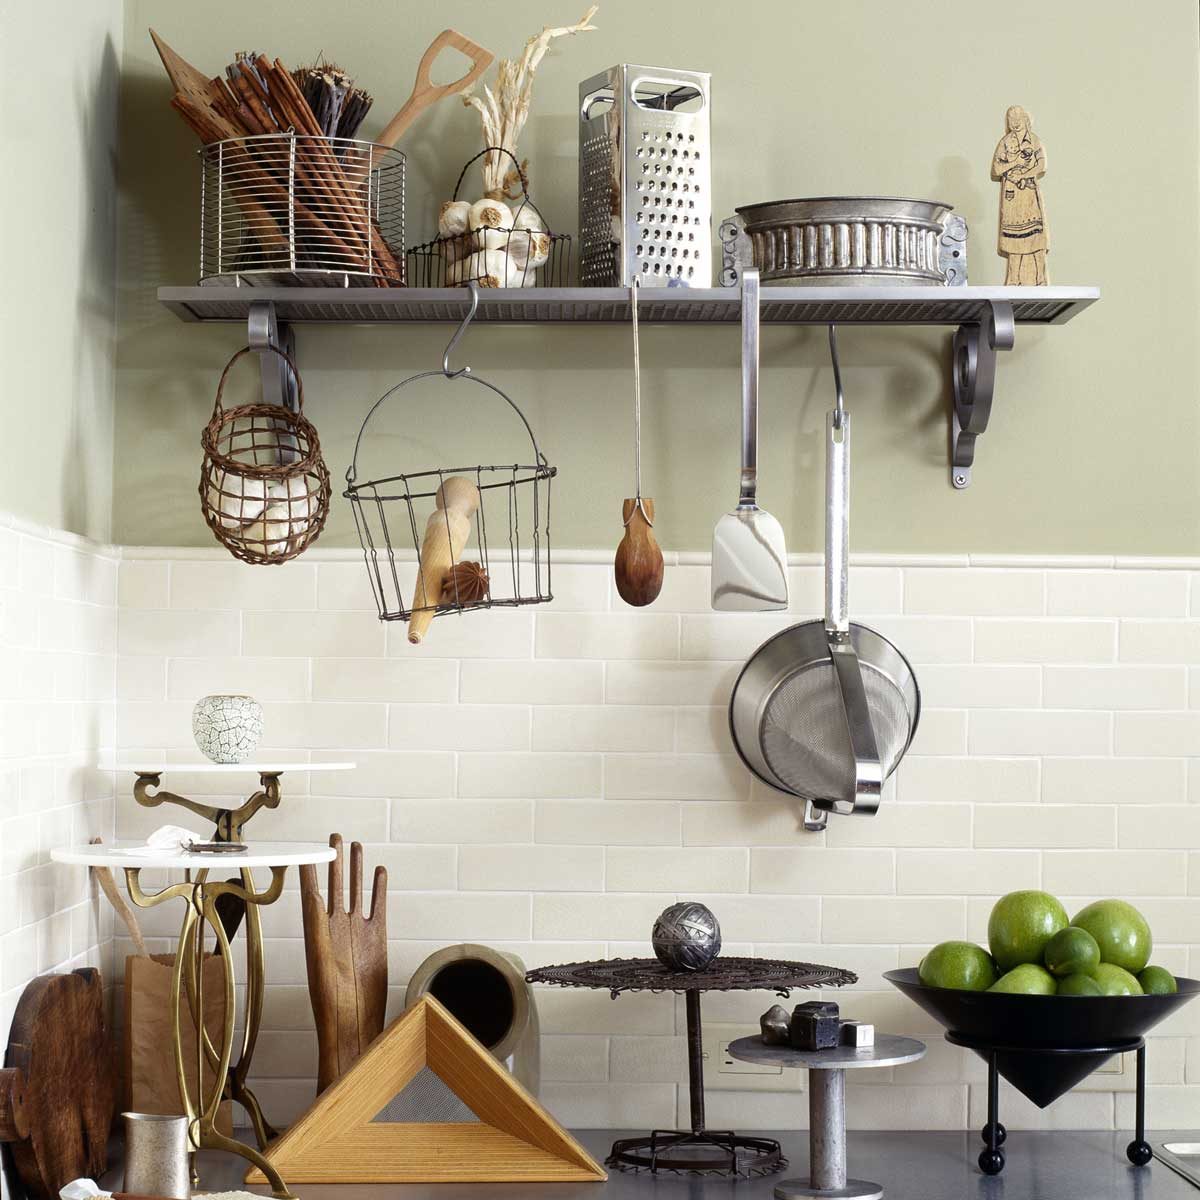 Maximize Your Kitchen Storage With This Pot Rack Organizer For